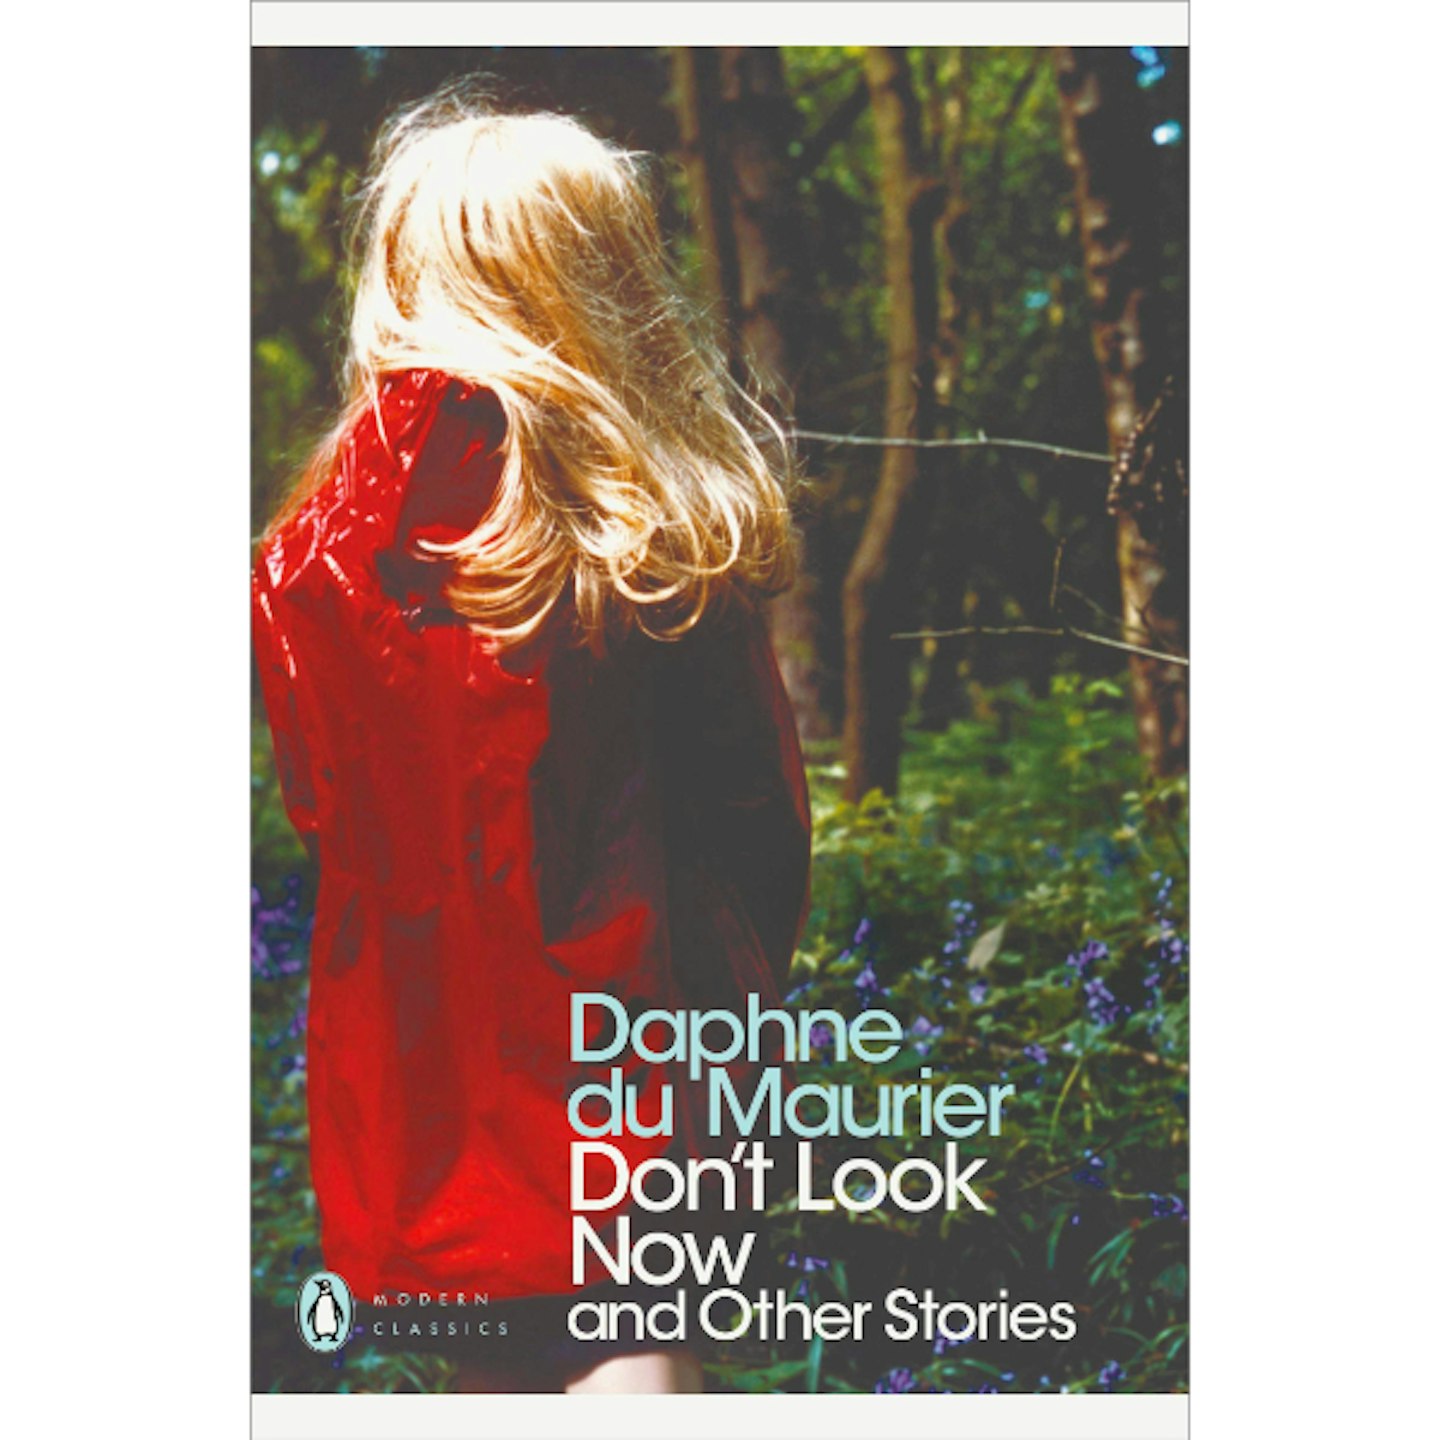 Donu2019t Look Now by Daphne Du Maurier